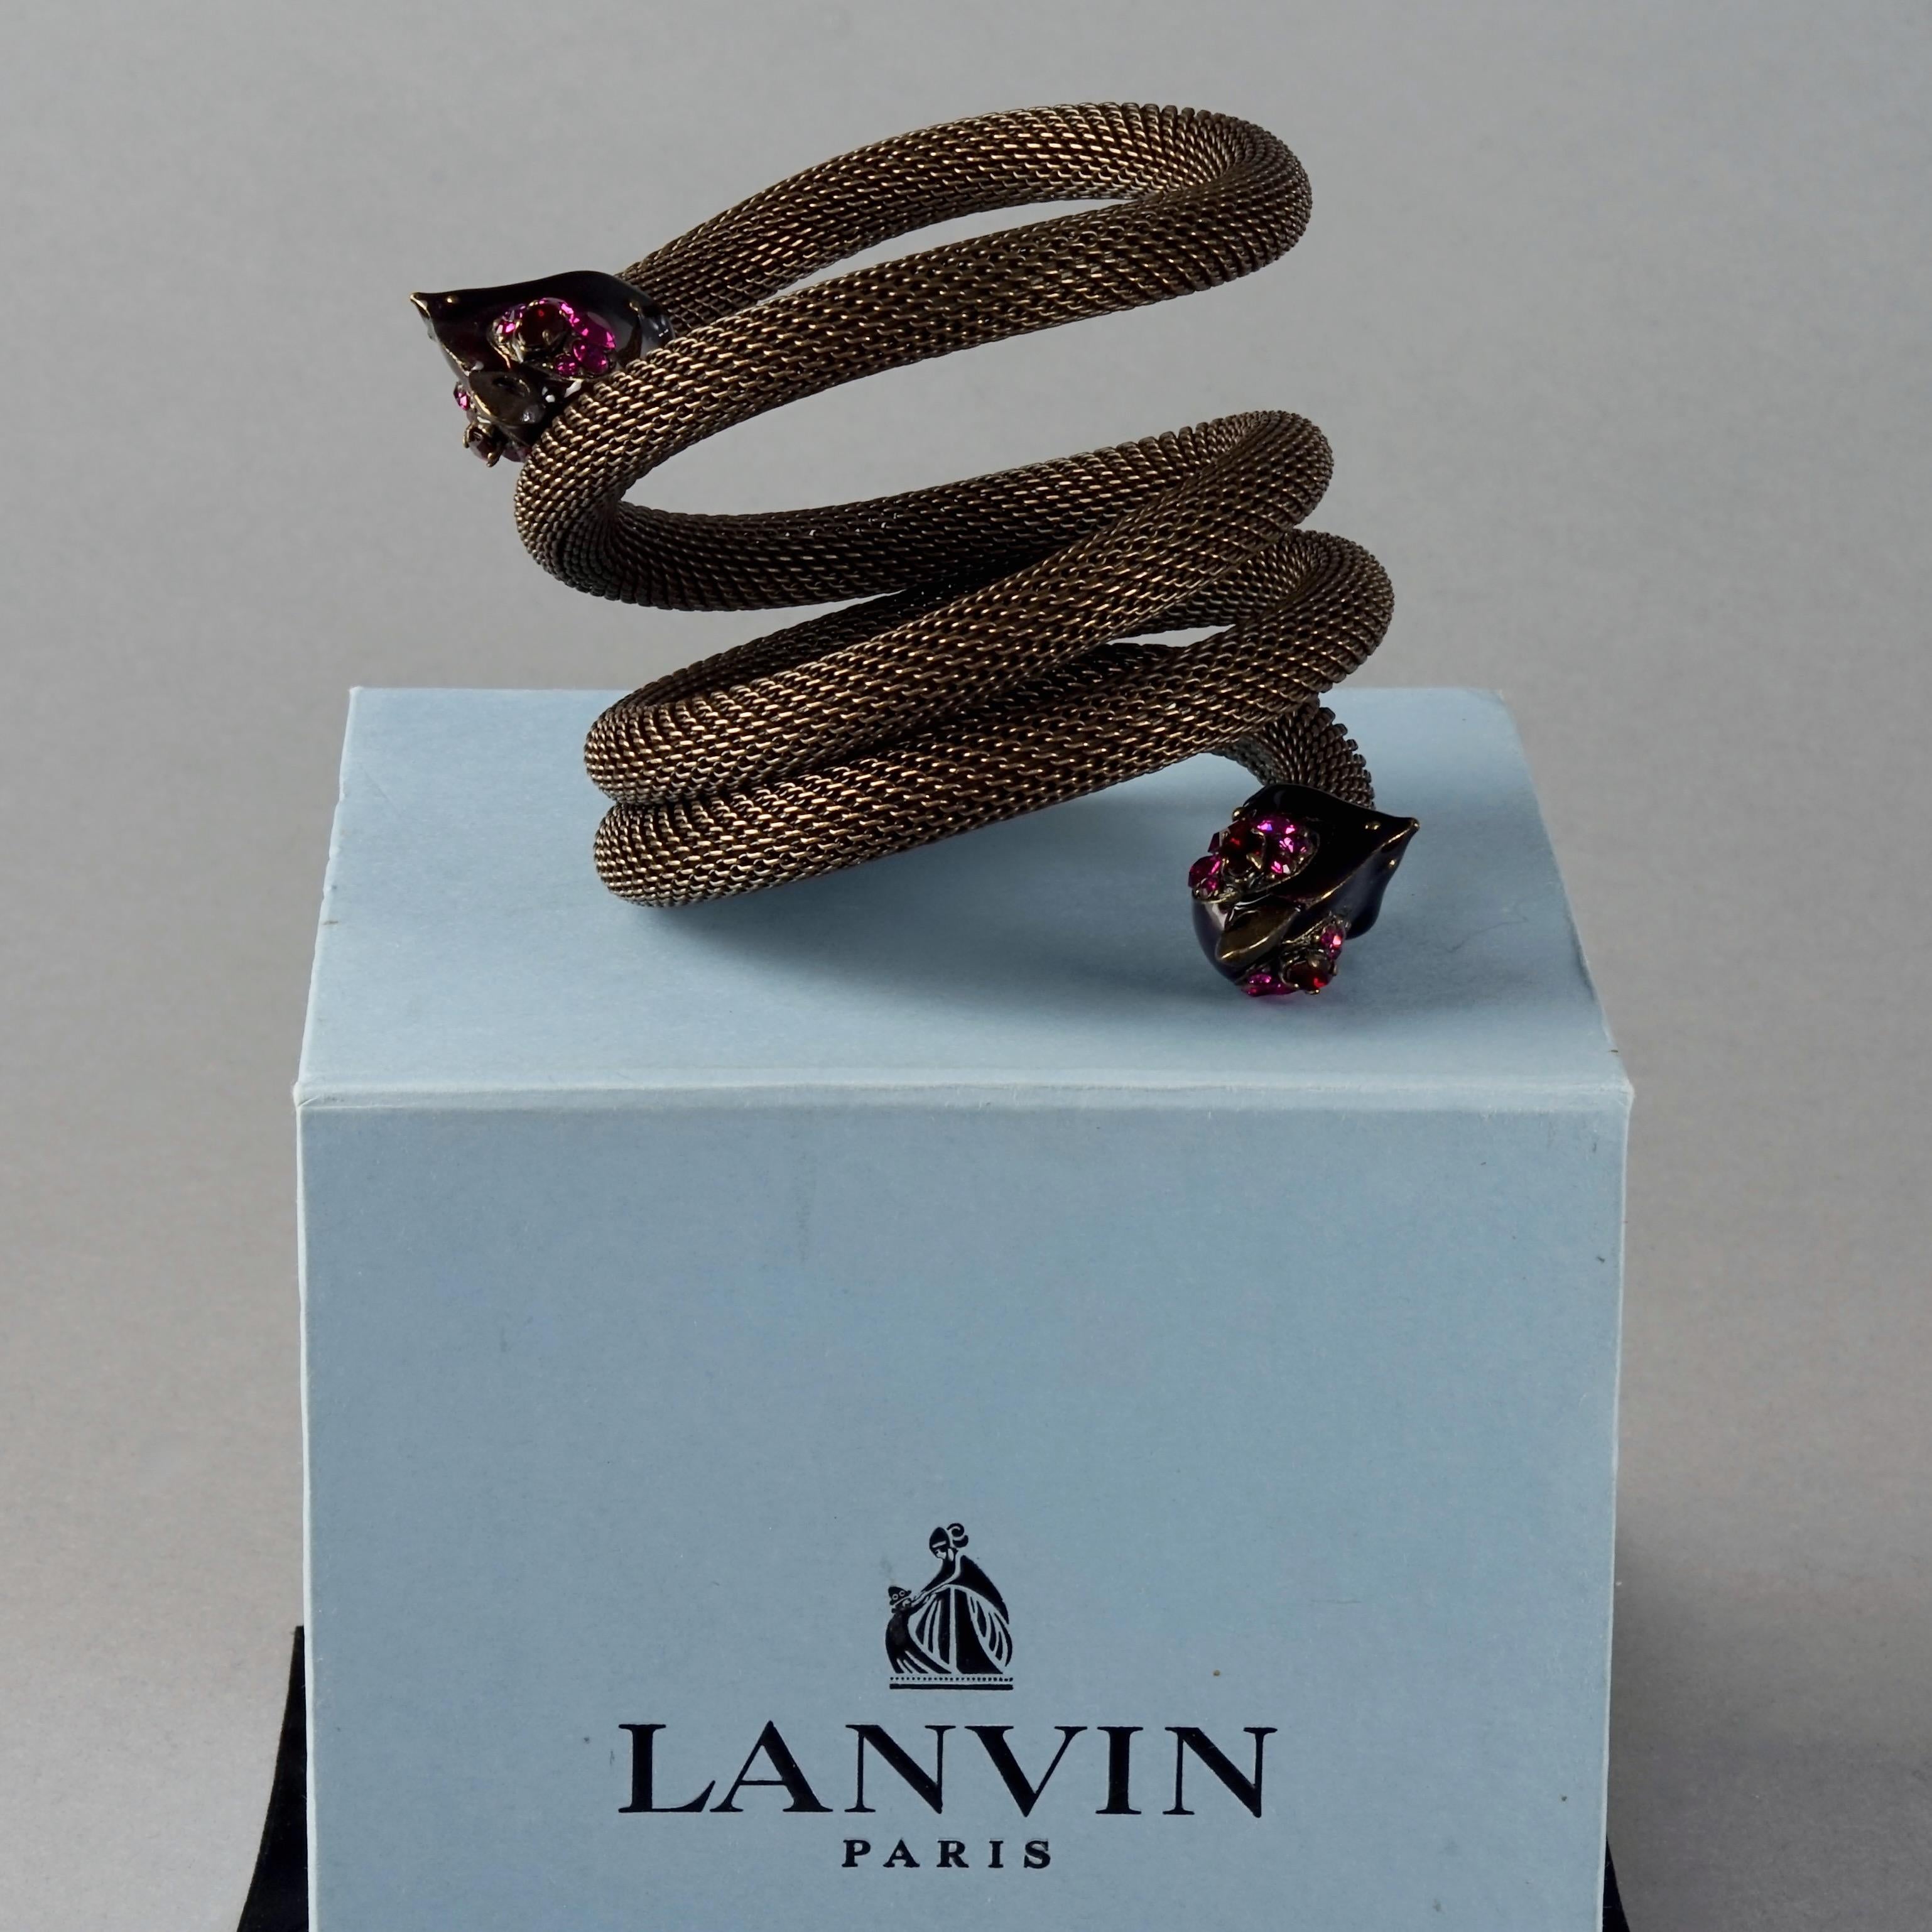 LANVIN PARIS Enamel Rhinestone Bird Four Rows Wrap Around Cuff Bracelet

Measurements:
One size fits all

Features:
- 100% Authentic LANVIN PARIS.
- Coiled wrap around cuff bracelet with purple enamelled bird heads.
- Bird heads are embellished with